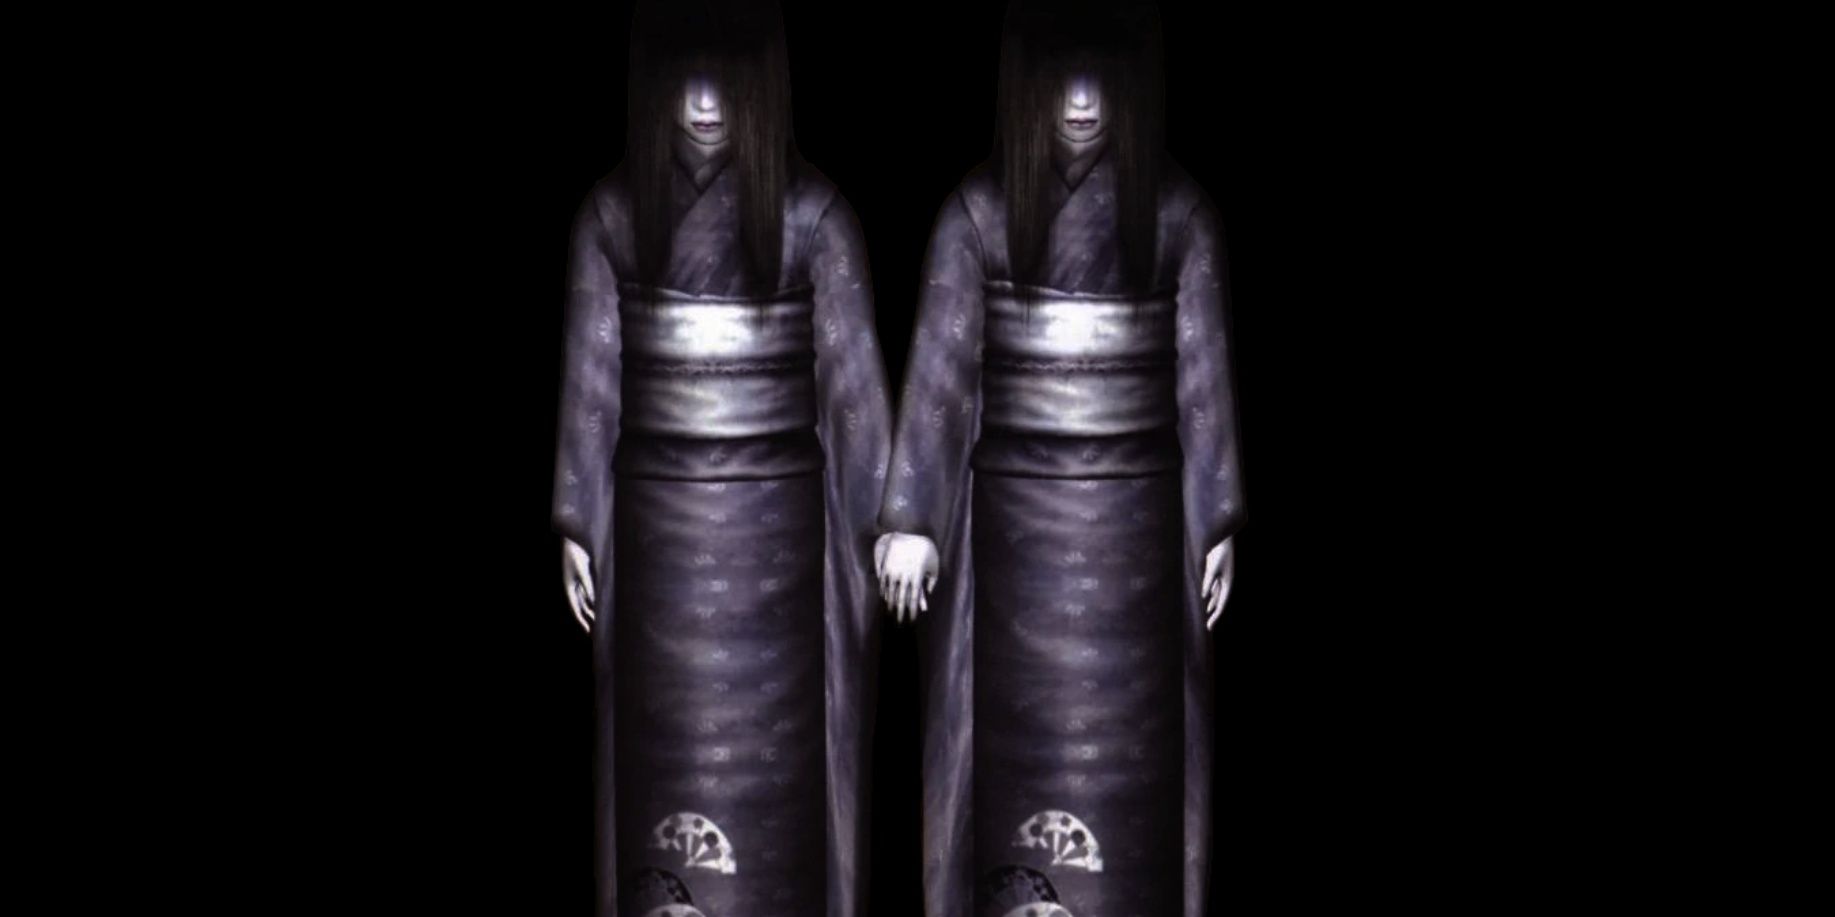 the kiryu sisters from fatal frame